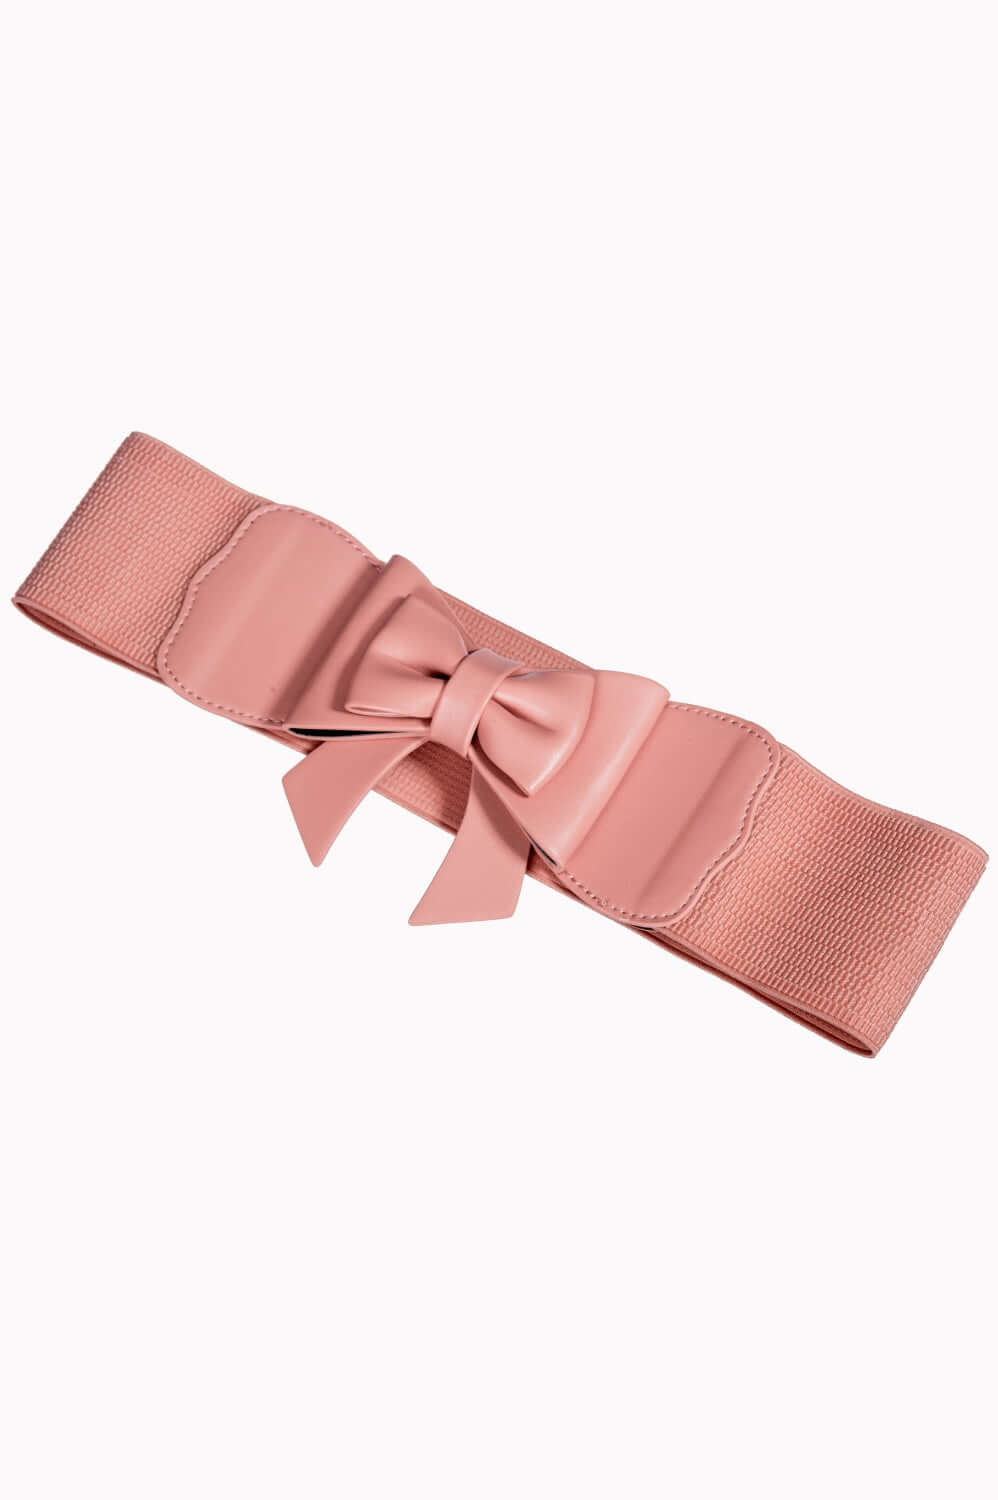 Dancing Days 50s Style Retro Elasticated Belt With Bow In Coral Pink; Dancing Days; 50s Retro Style; Elasticated Belt; Coral Pink Bow Design; Pink